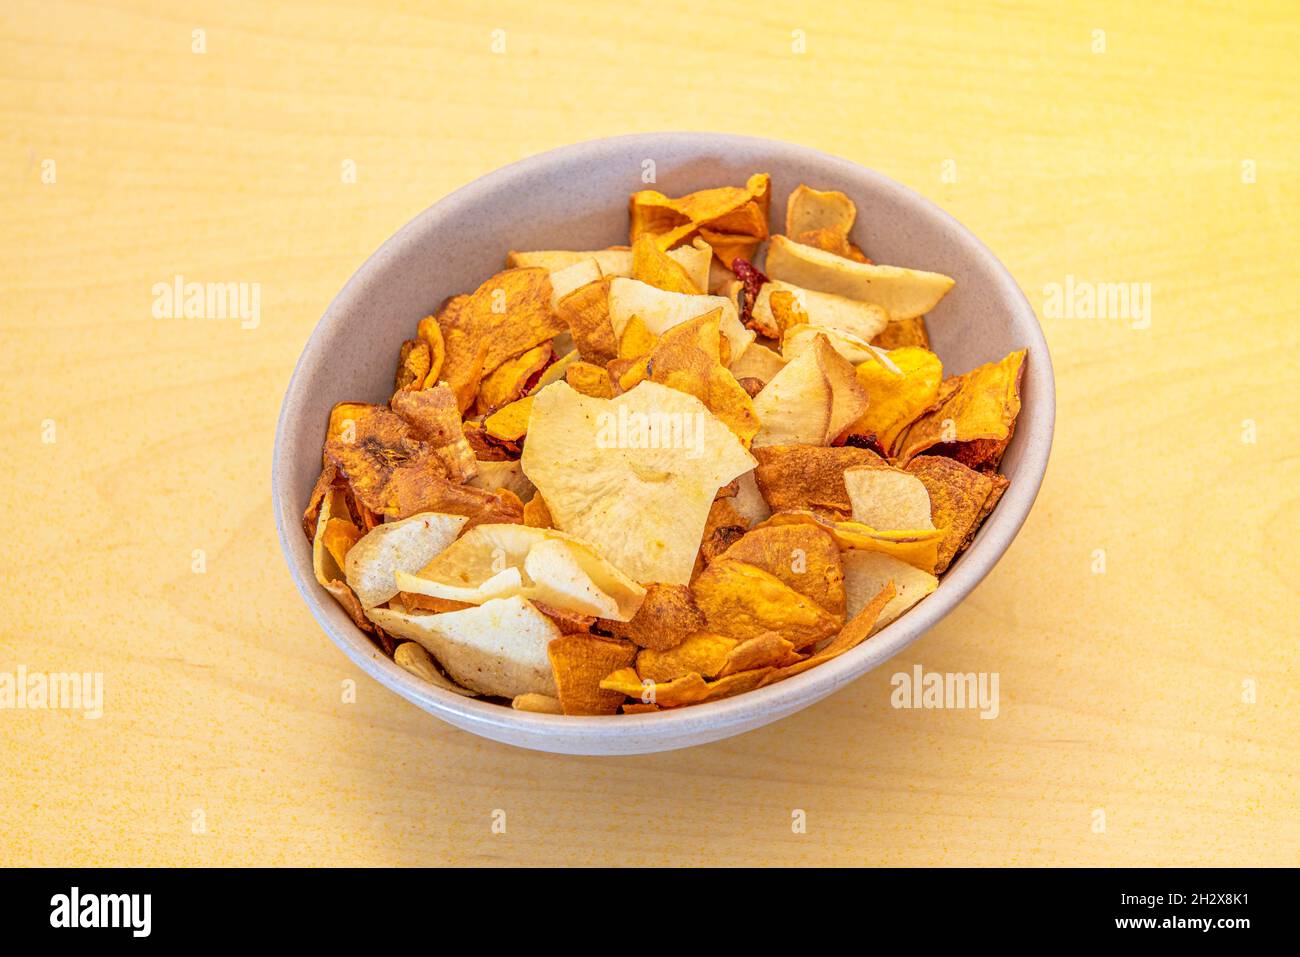 Appetizers bowl of potato chips, sweet potatoes, plantains and other vegetables on yellow table Stock Photo